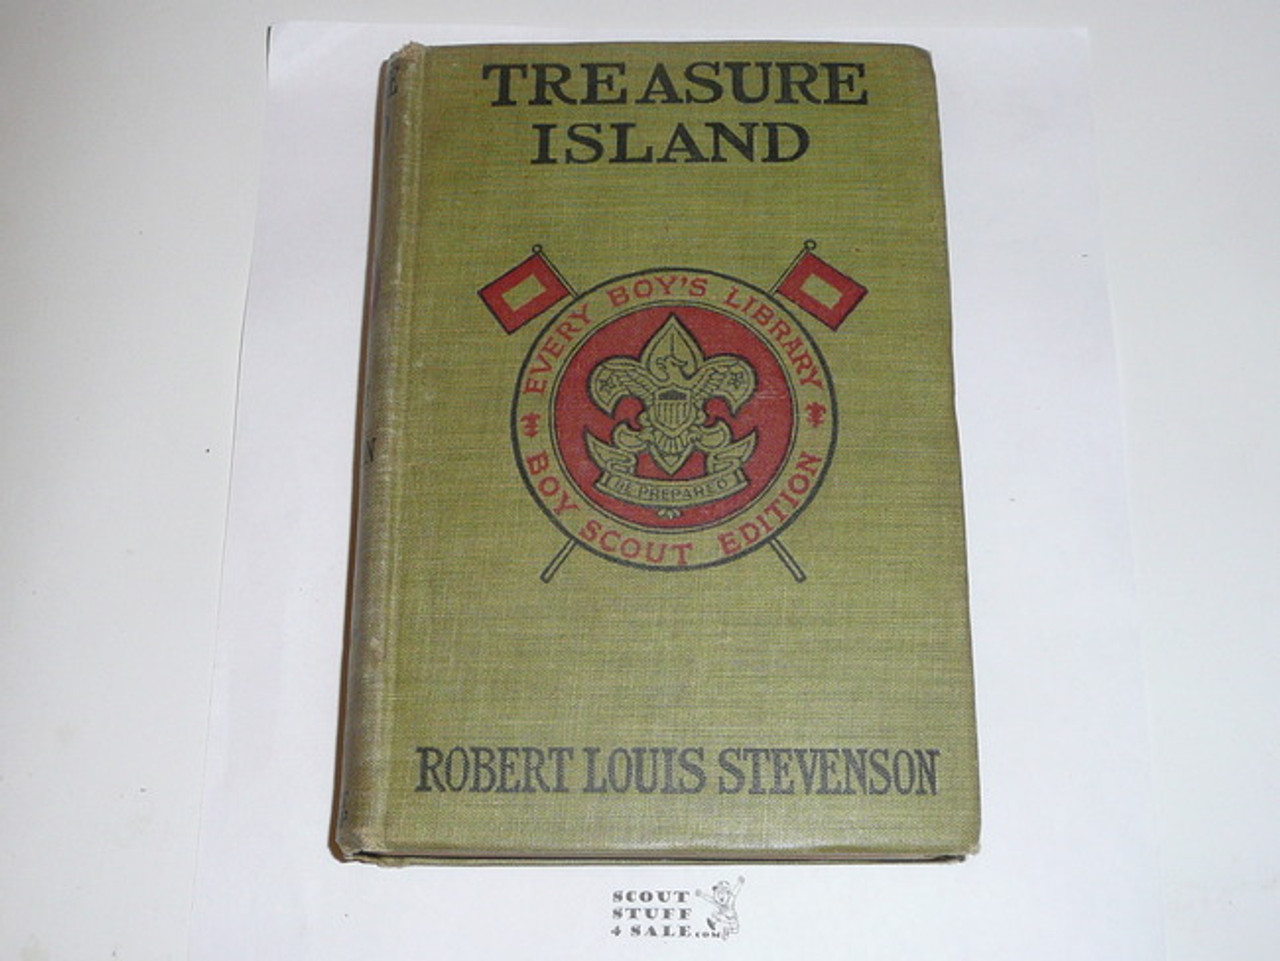 Treasure Island, By Robert Louis Stevenson, 1913, Every Boy's Library Edition, Type Two Binding